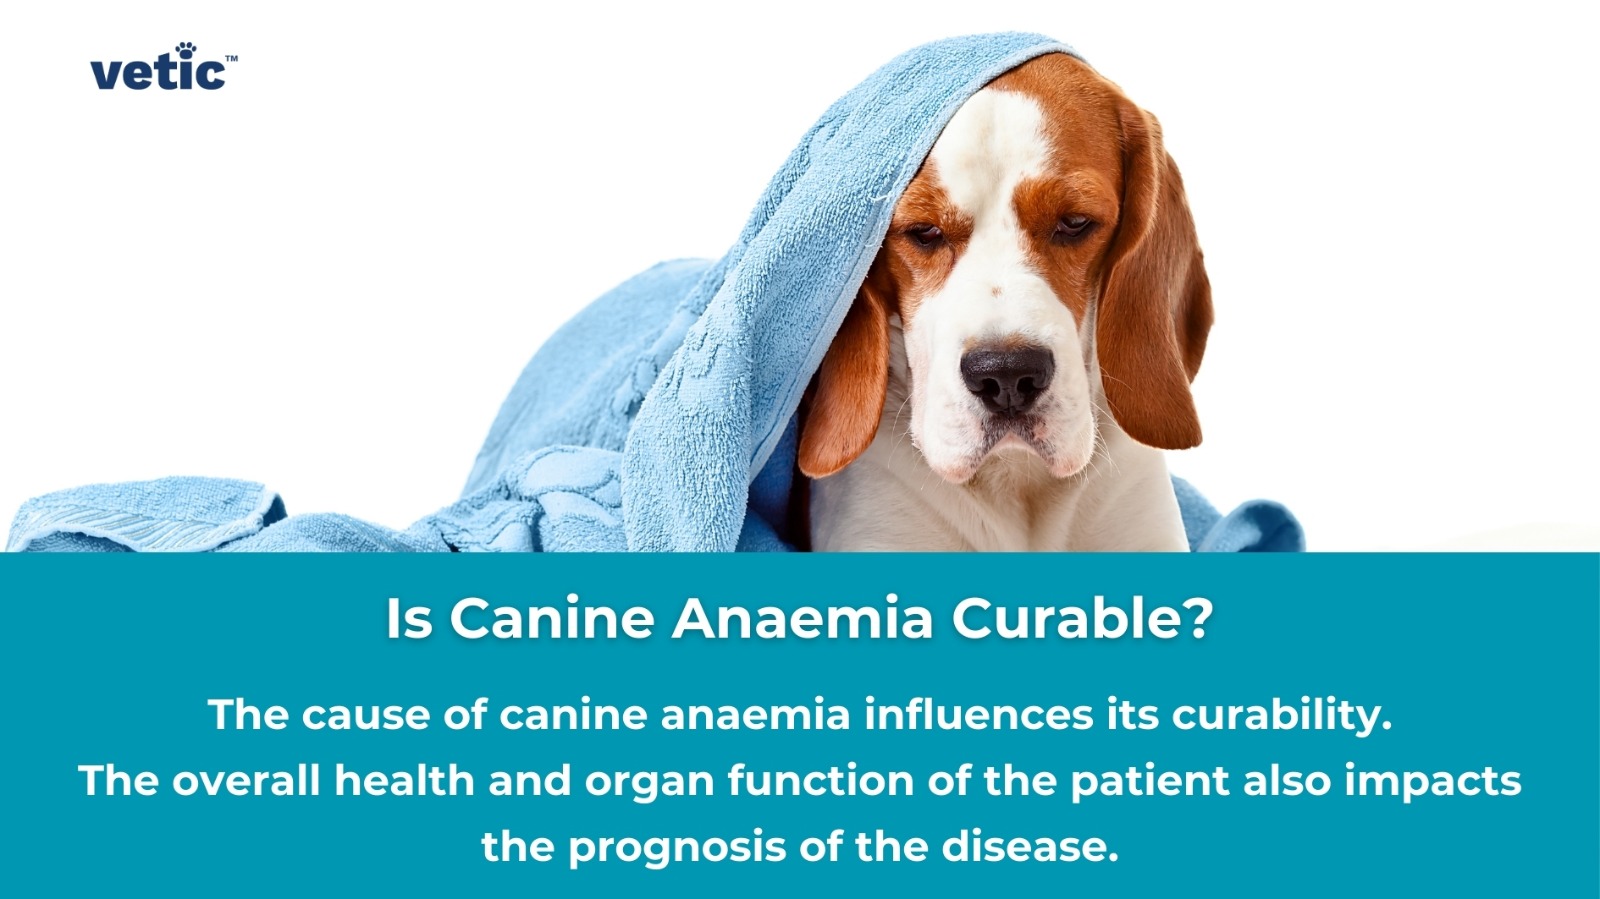 The image contains the logo of “vetic” at the top left corner. A person’s face is blurred, and they are holding a dog wrapped in a blue towel. The text reads: “Is Canine Anaemia Curable? The cause of canine anaemia influences its curability. The overall health and organ function of the patient also impacts the prognosis of the disease.”